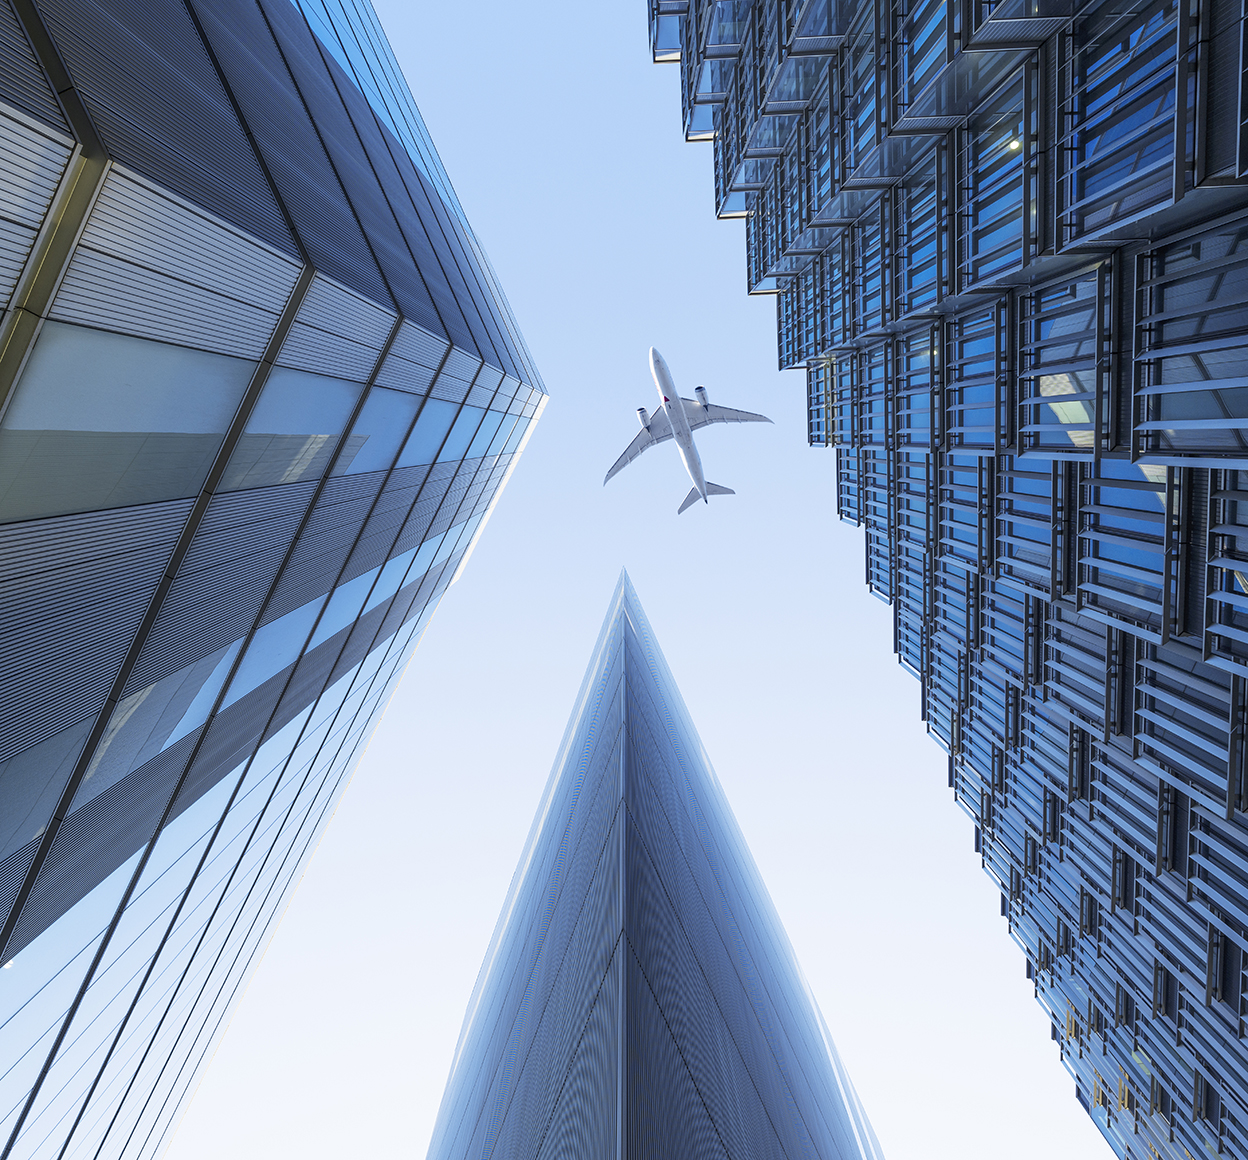 Ground photo looking up at an airliner flying over a group of city skyscrapers